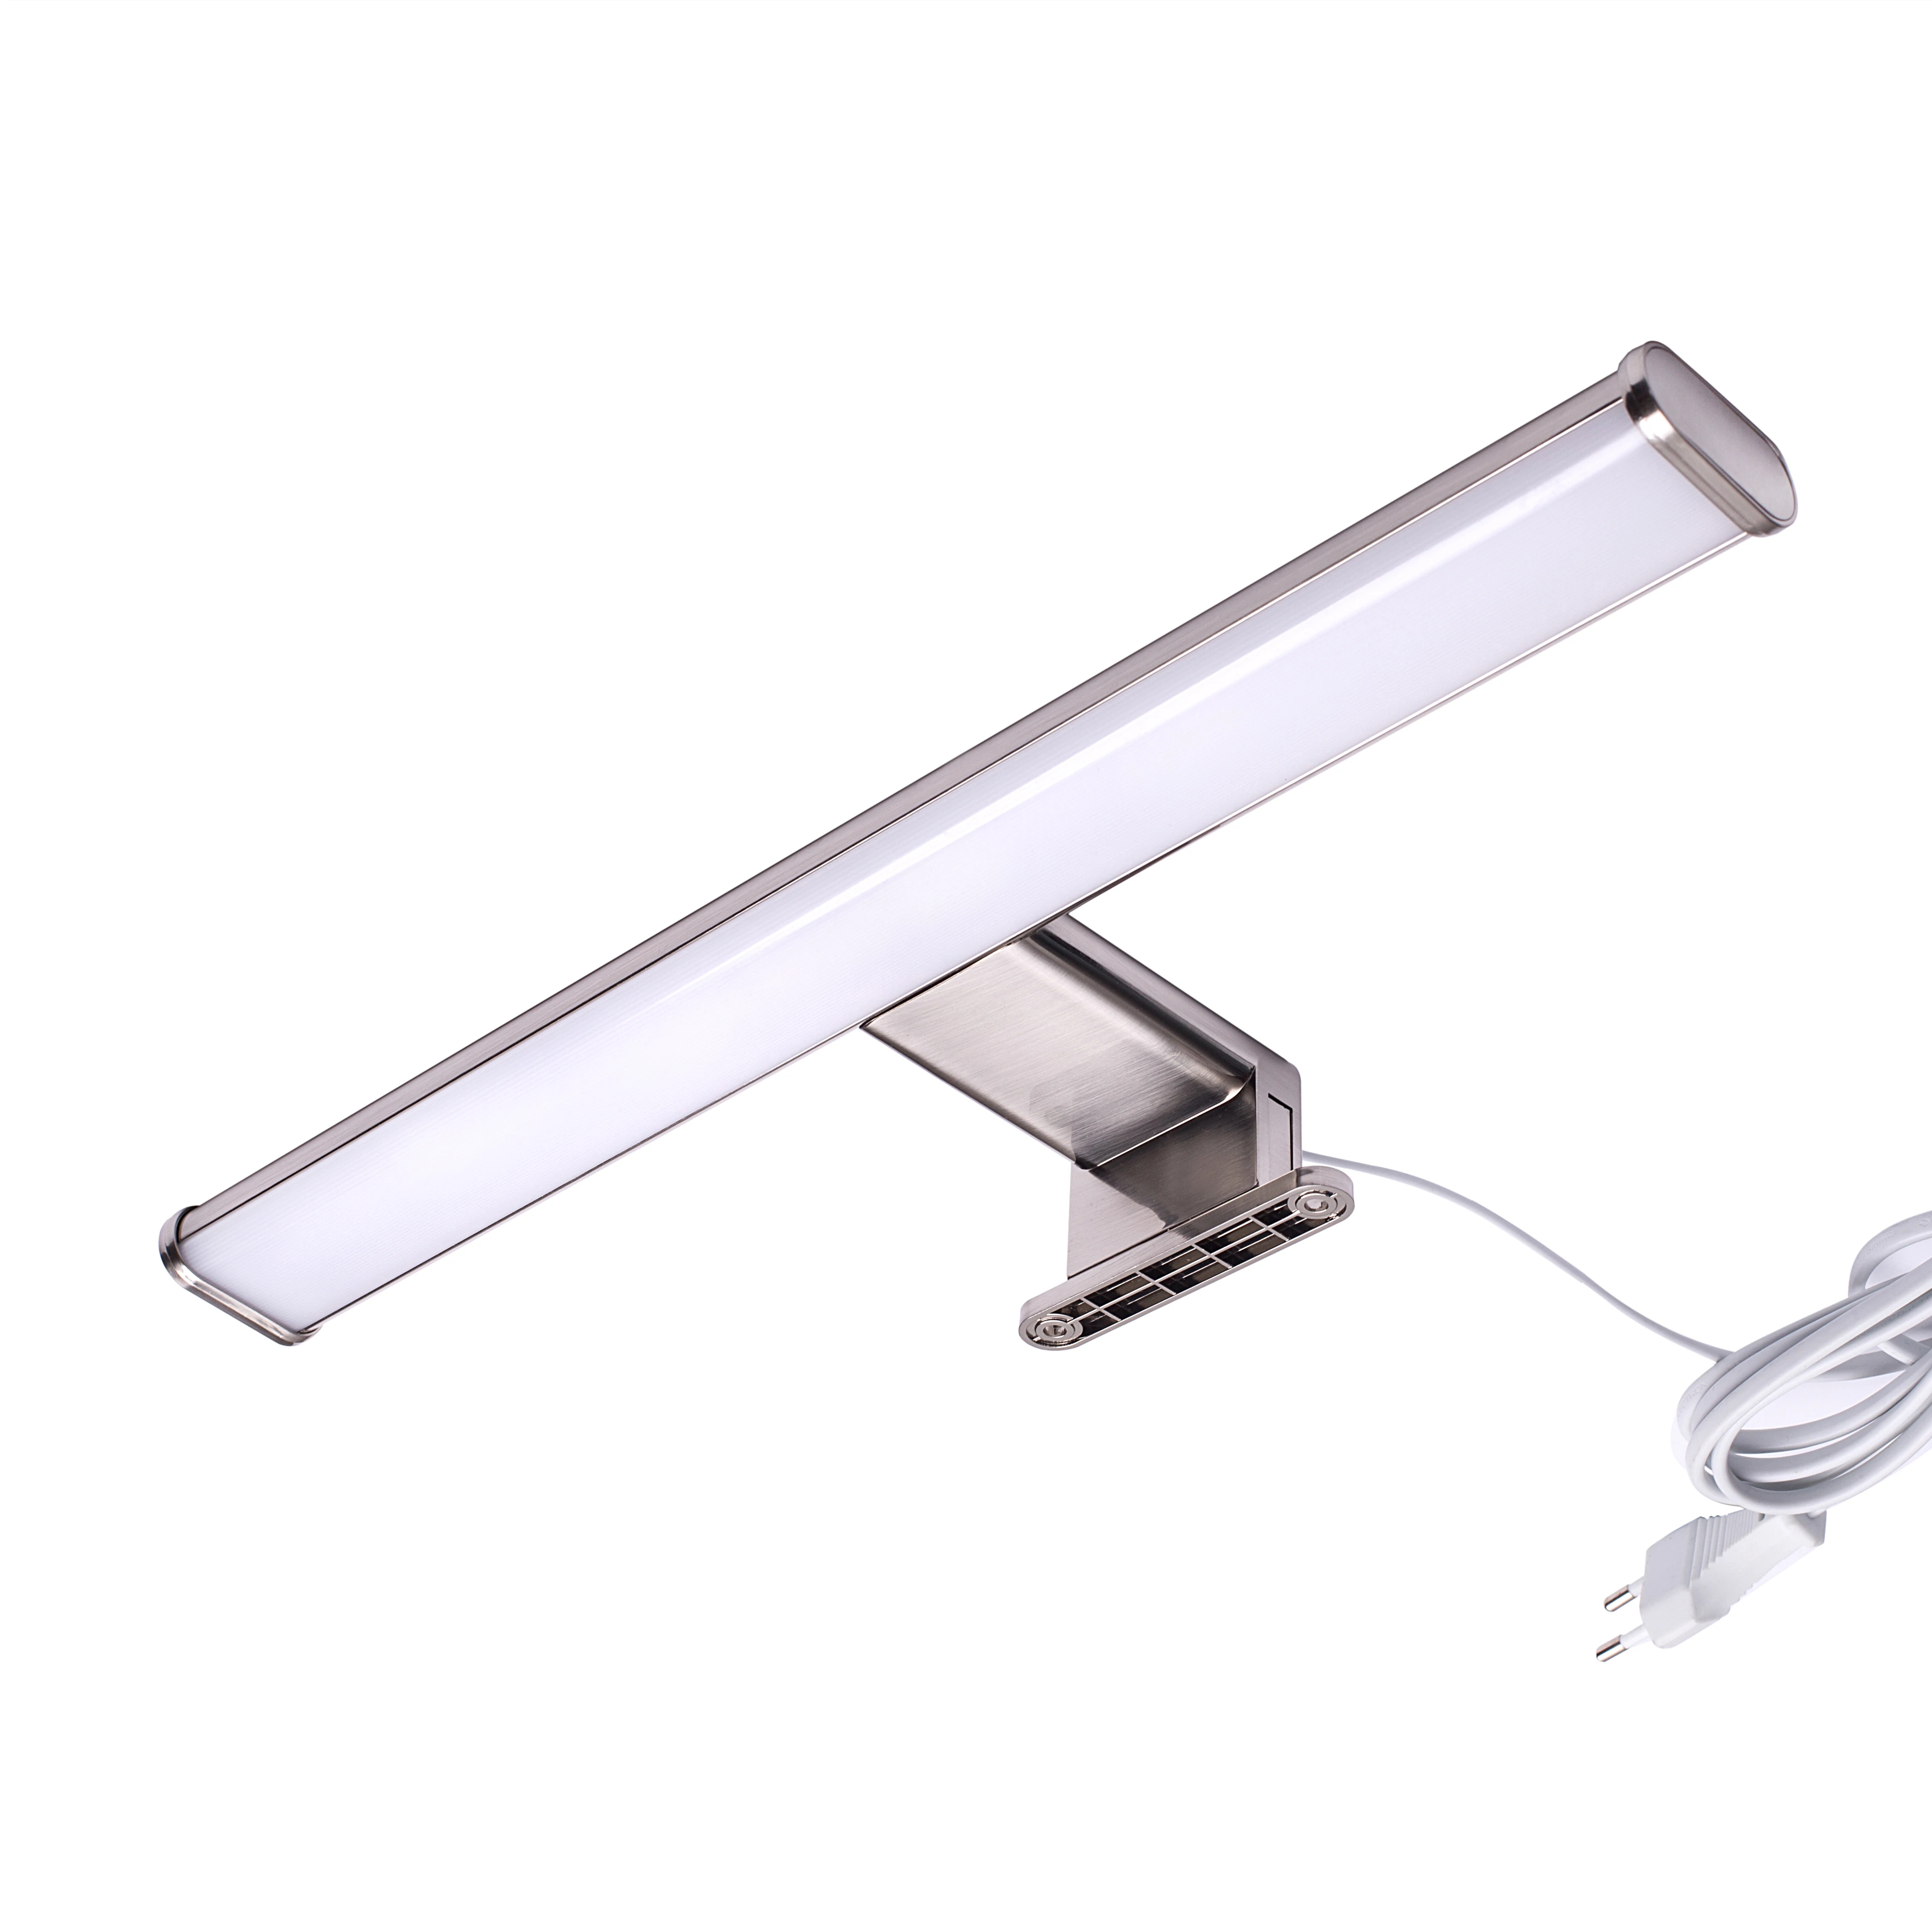 GS standard vanity led bathroom mirror attached light led lamp fixtures